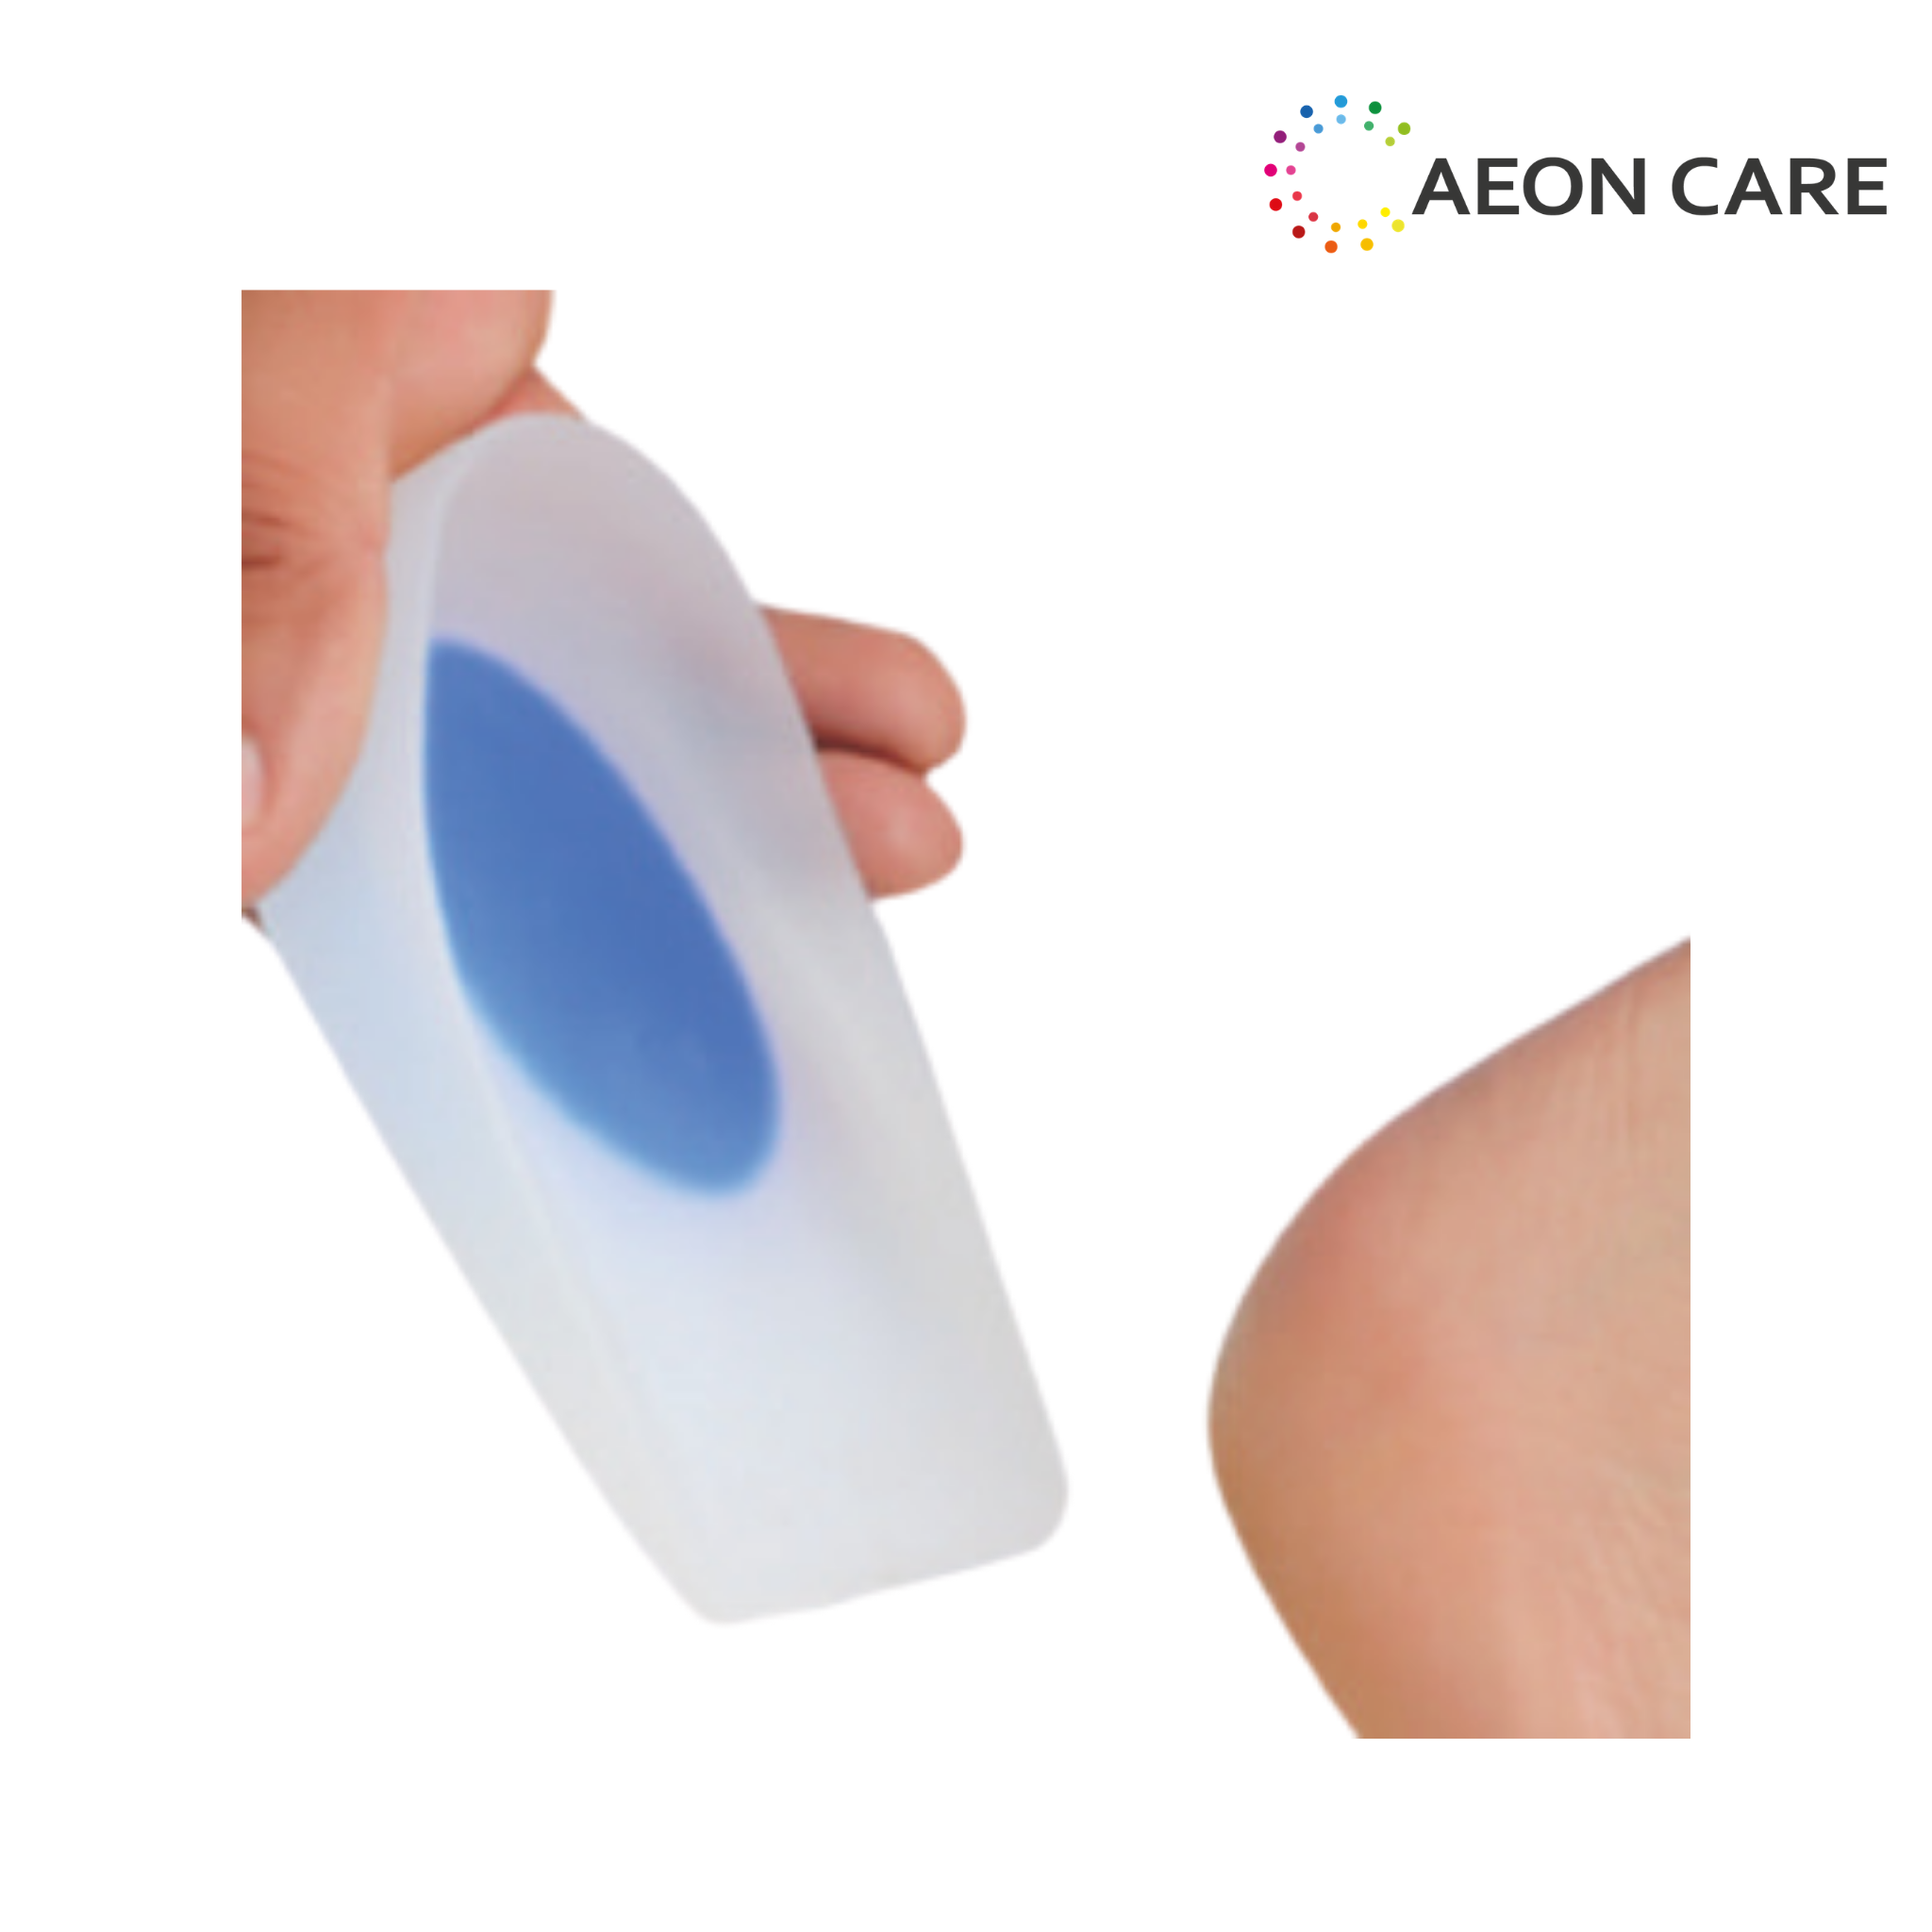 Dyna Silicone Heel Cushion Pad at best price in AeonCare Chennai 